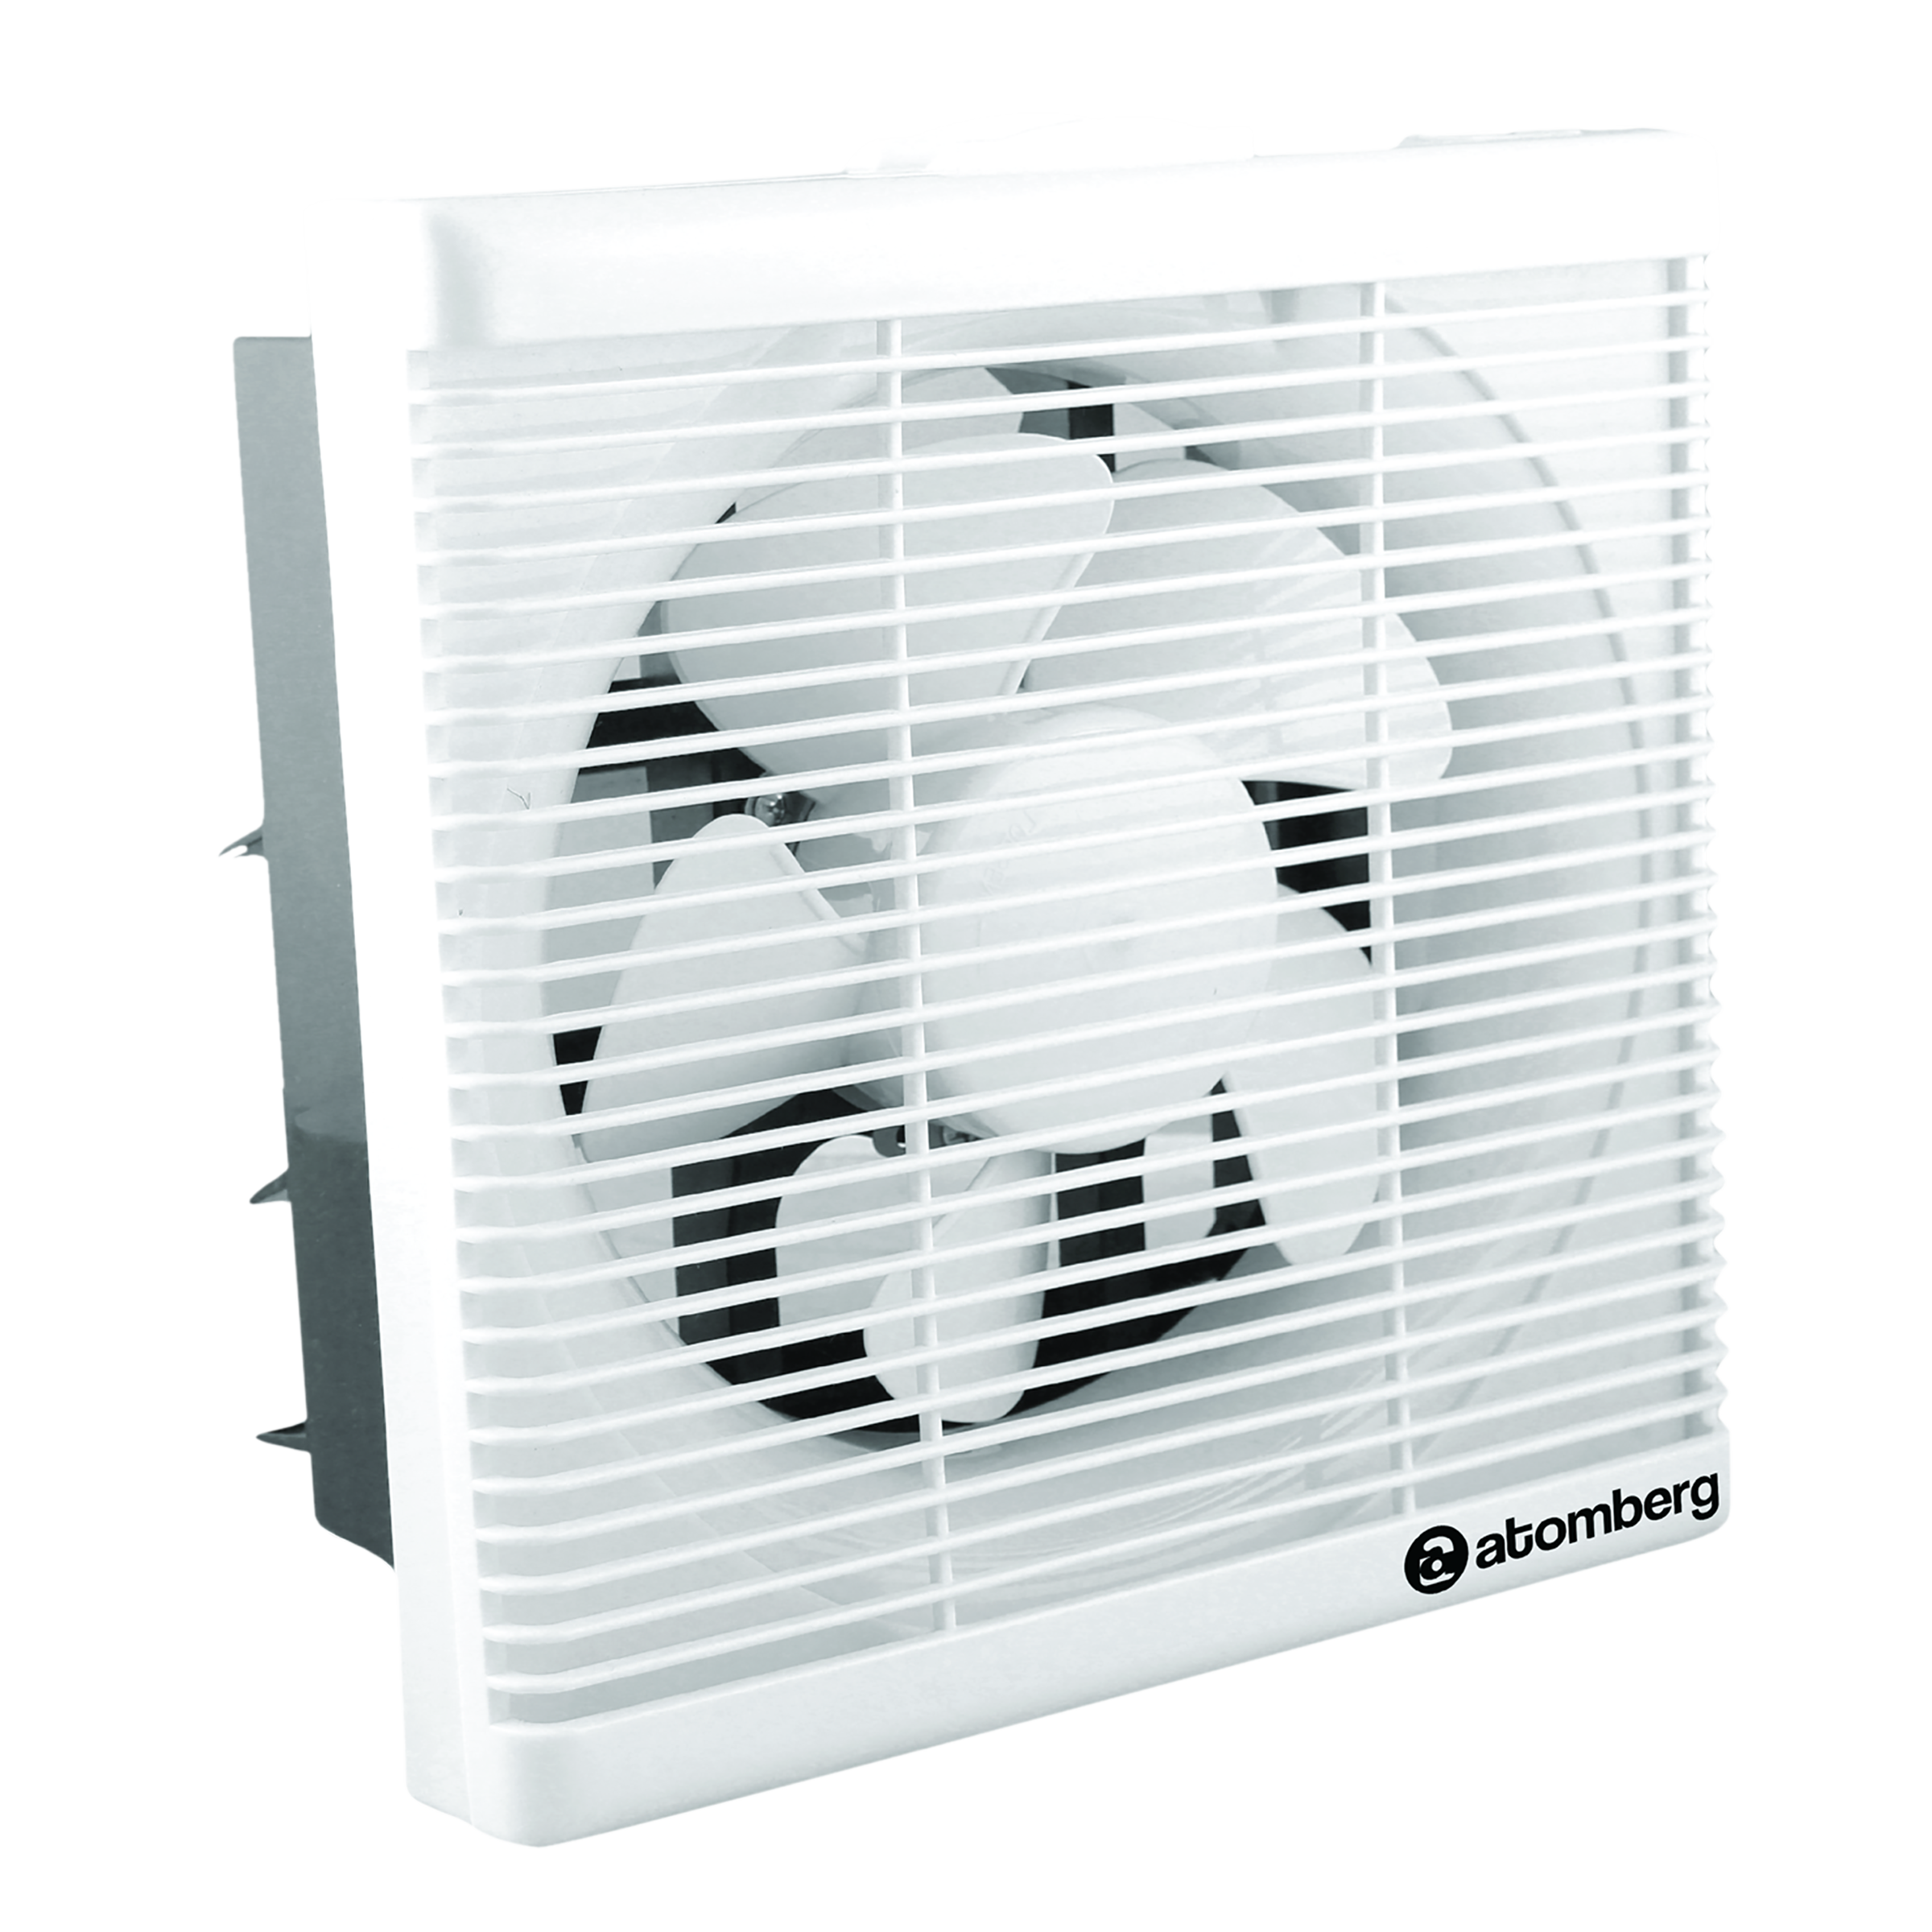 atomberg Efficio 6 Inch 150mm Exhaust Fan with BLDC Motor (Silent Operation, White)